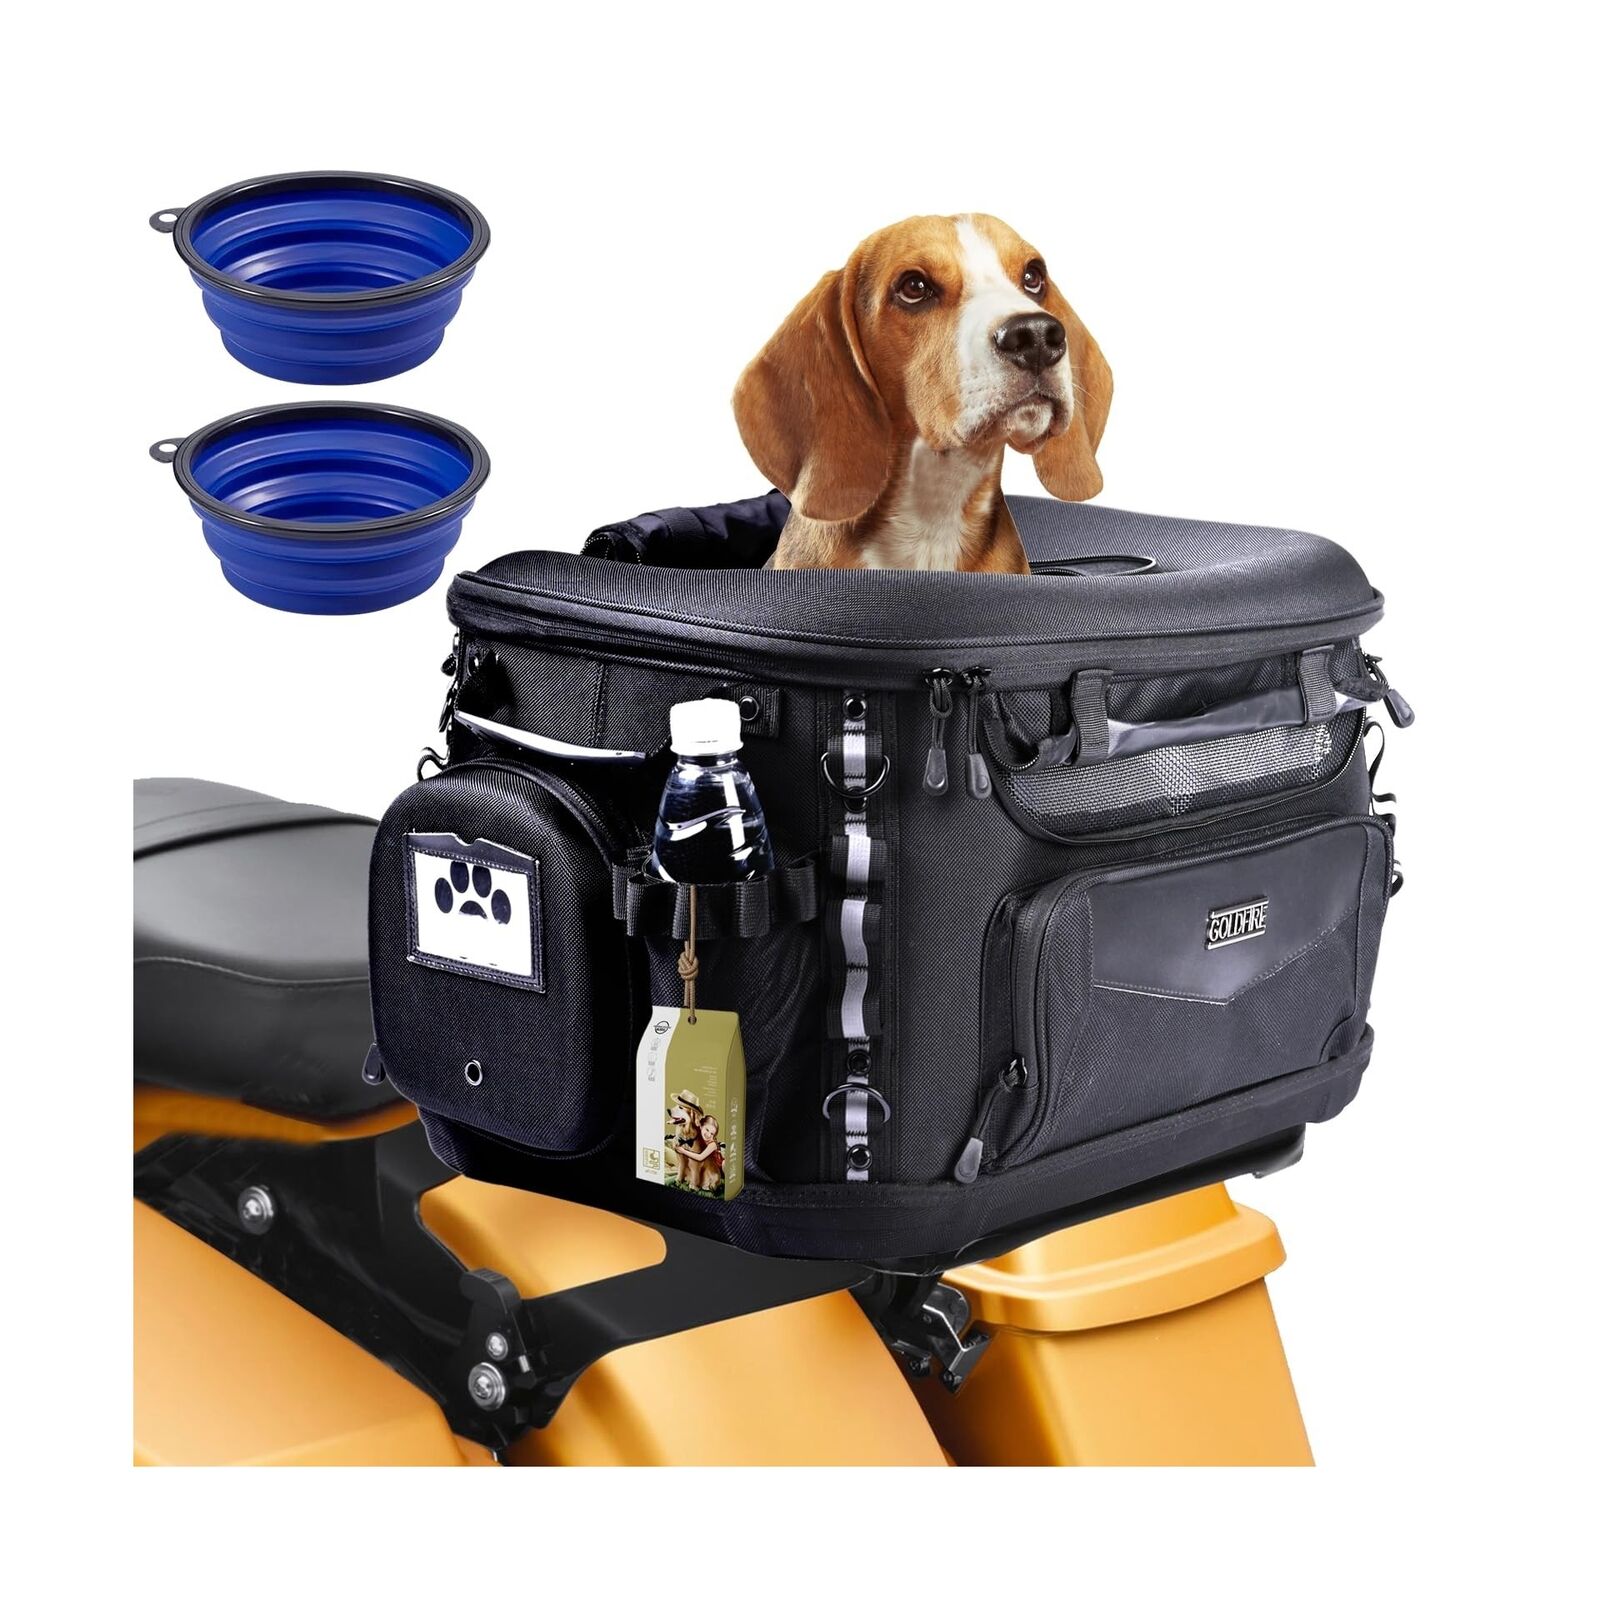 Paw Prize Motorcycle Dog Carrier, Portable Cat Carrier